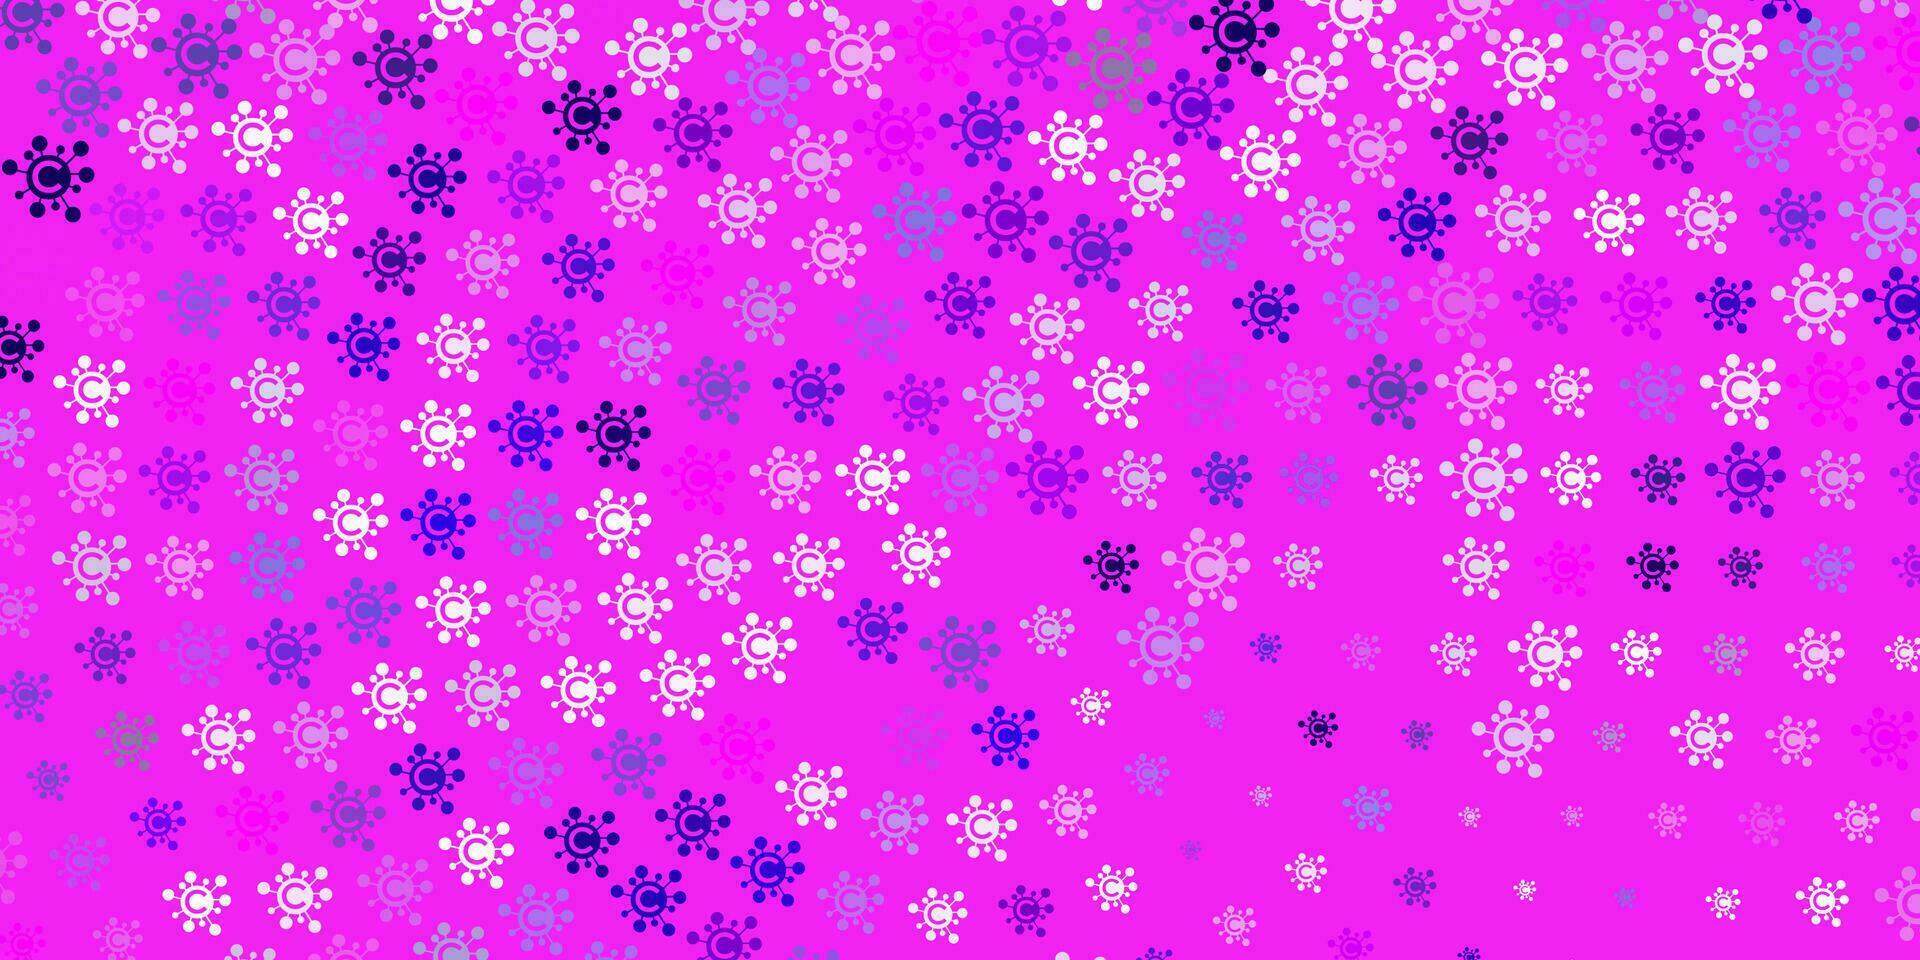 Light Purple vector background with covid-19 symbols.